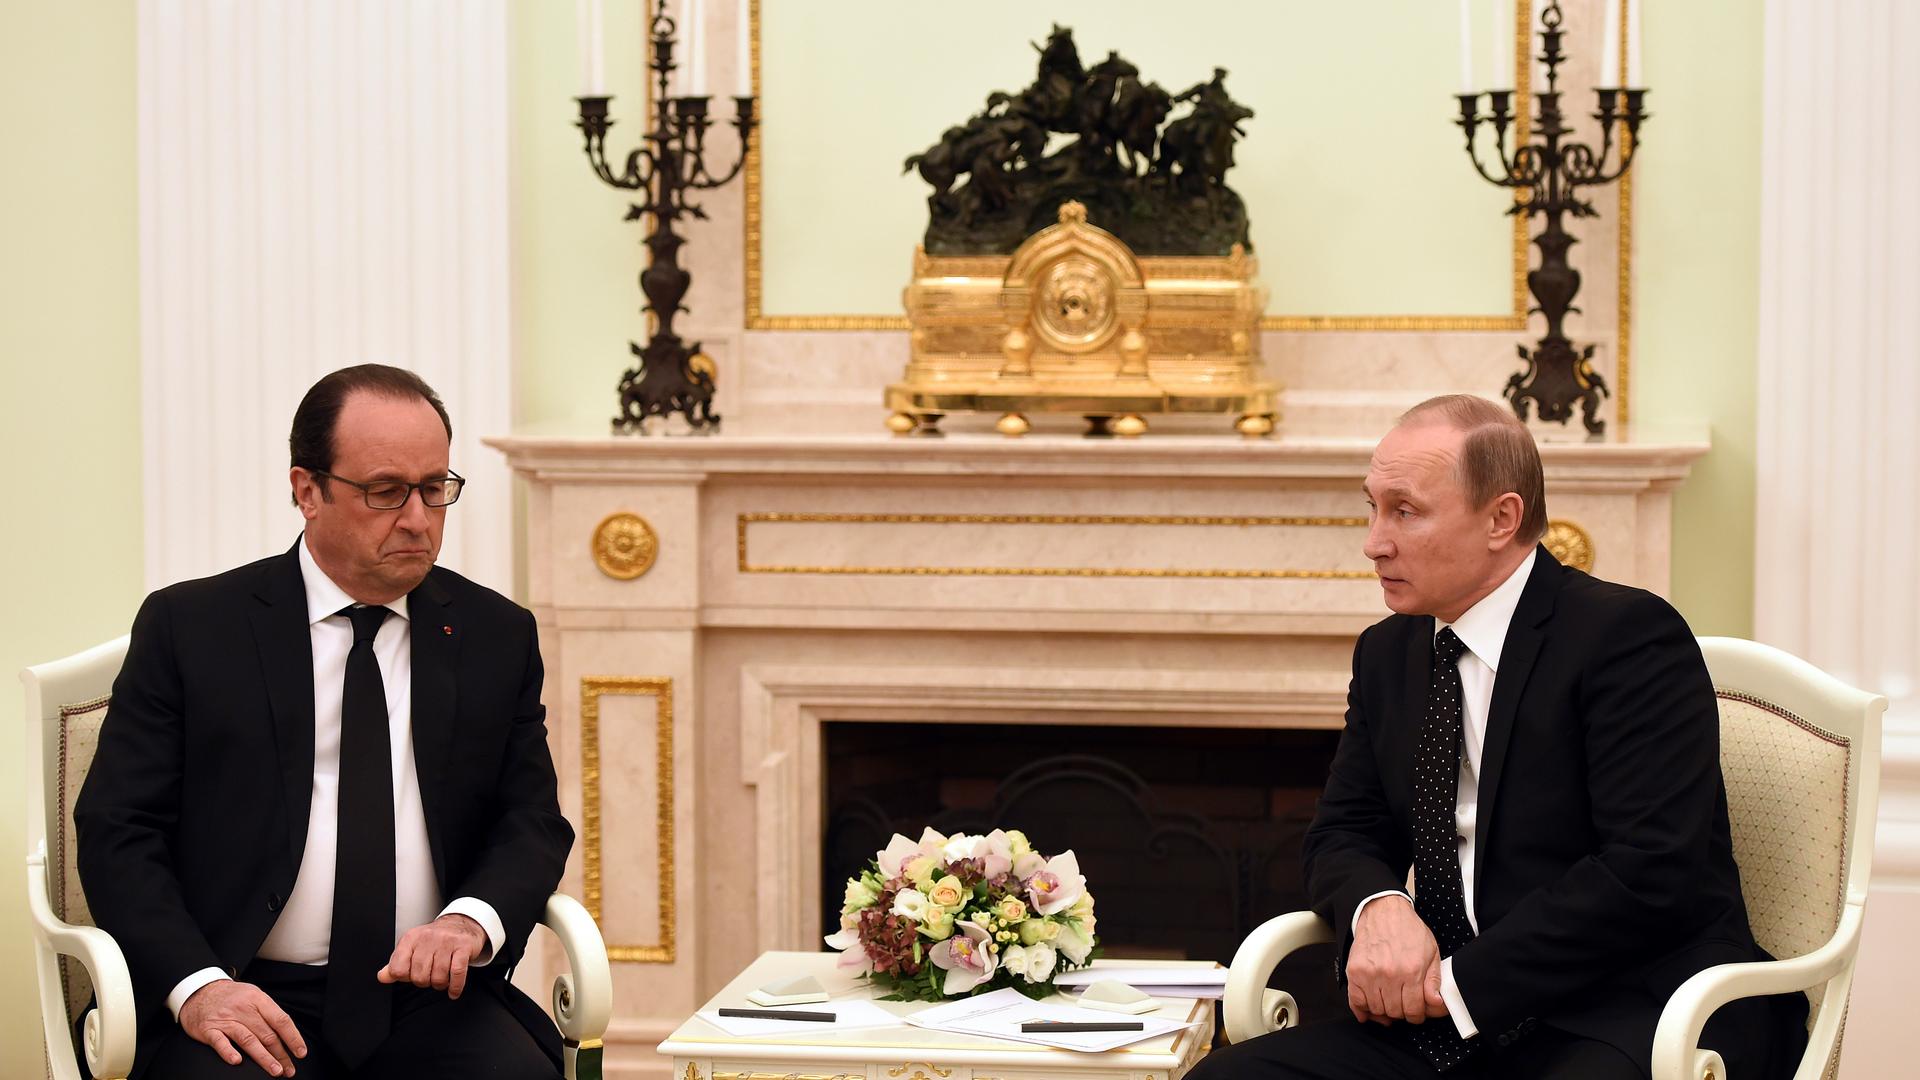 Russia's President Vladimir Putin meets with his French counterpart Francois Hollande at the Kremlin in Moscow, Russia, November 26, 2015.